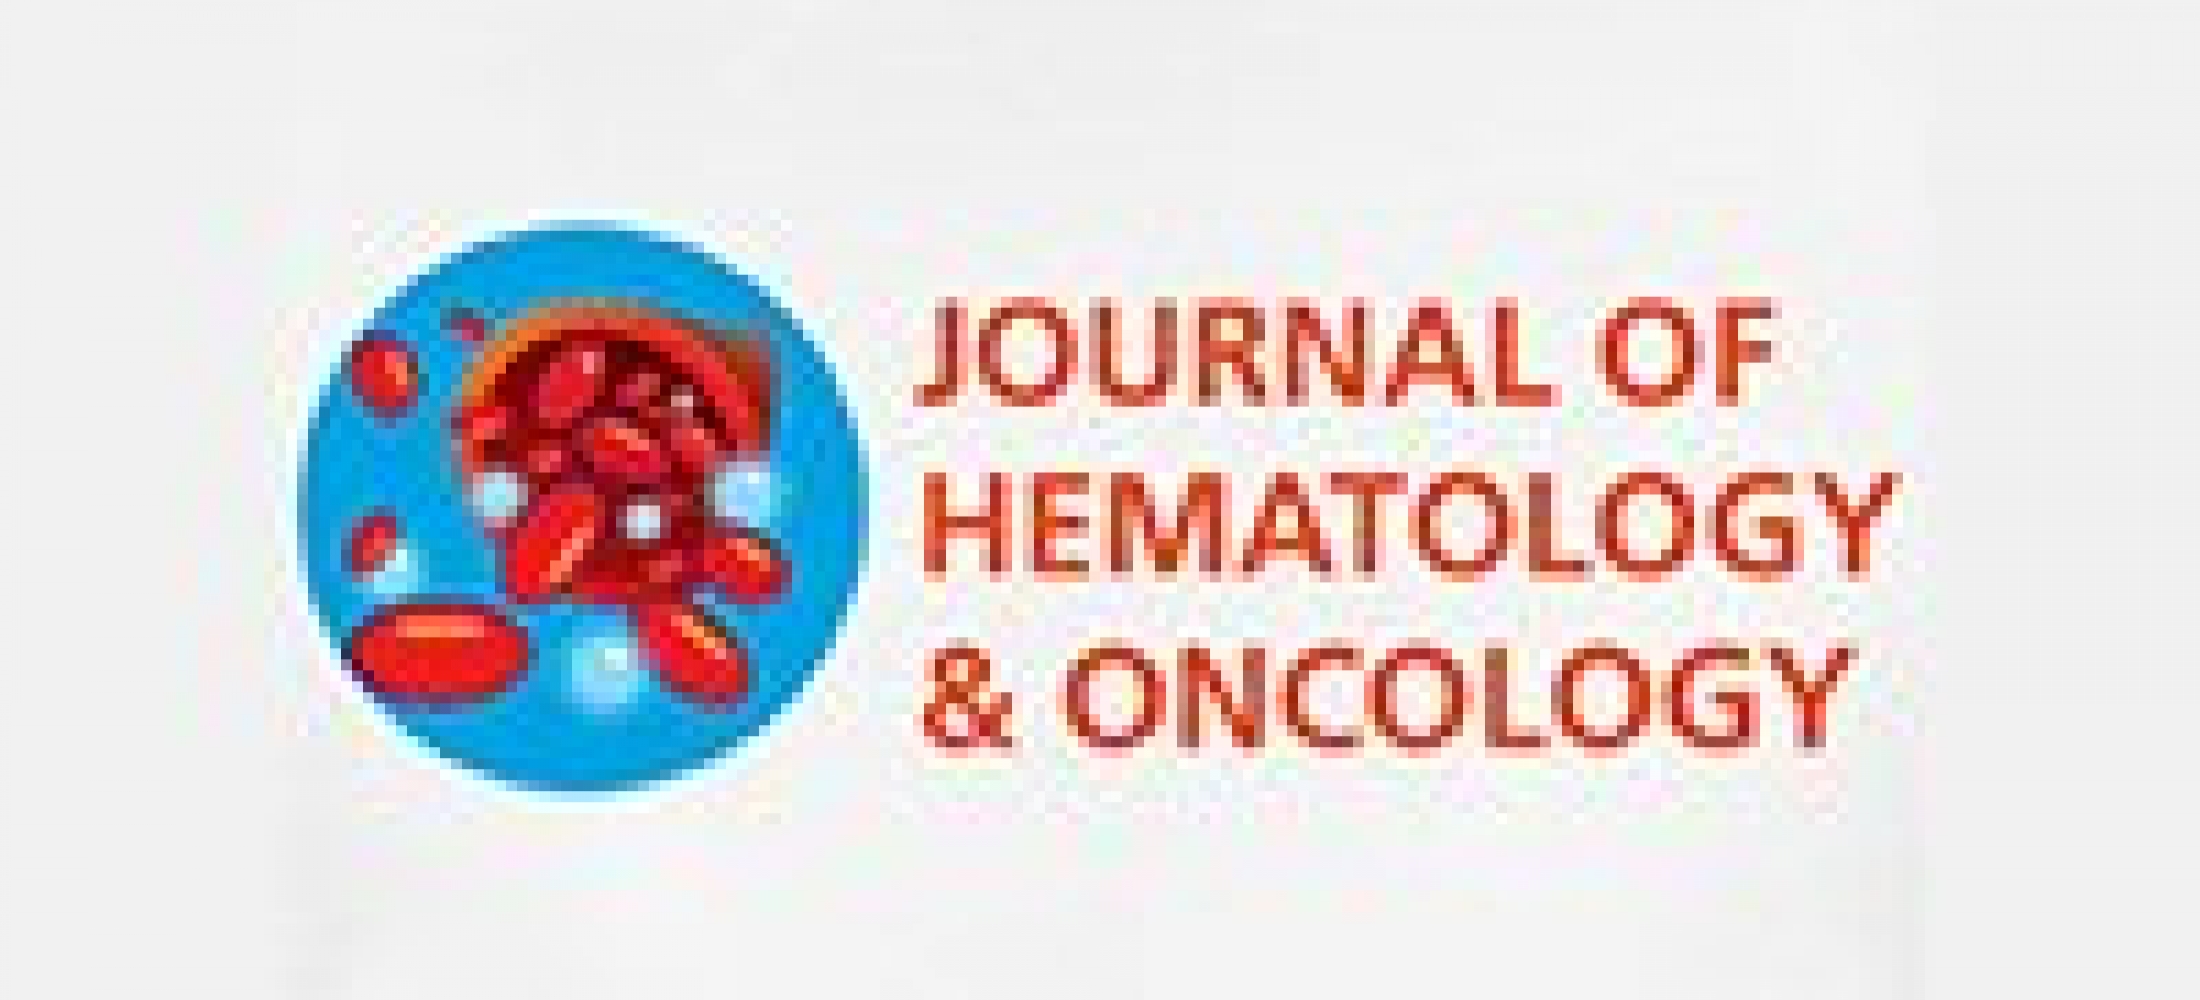 Journal of Hematology and Oncology PROBIOMED